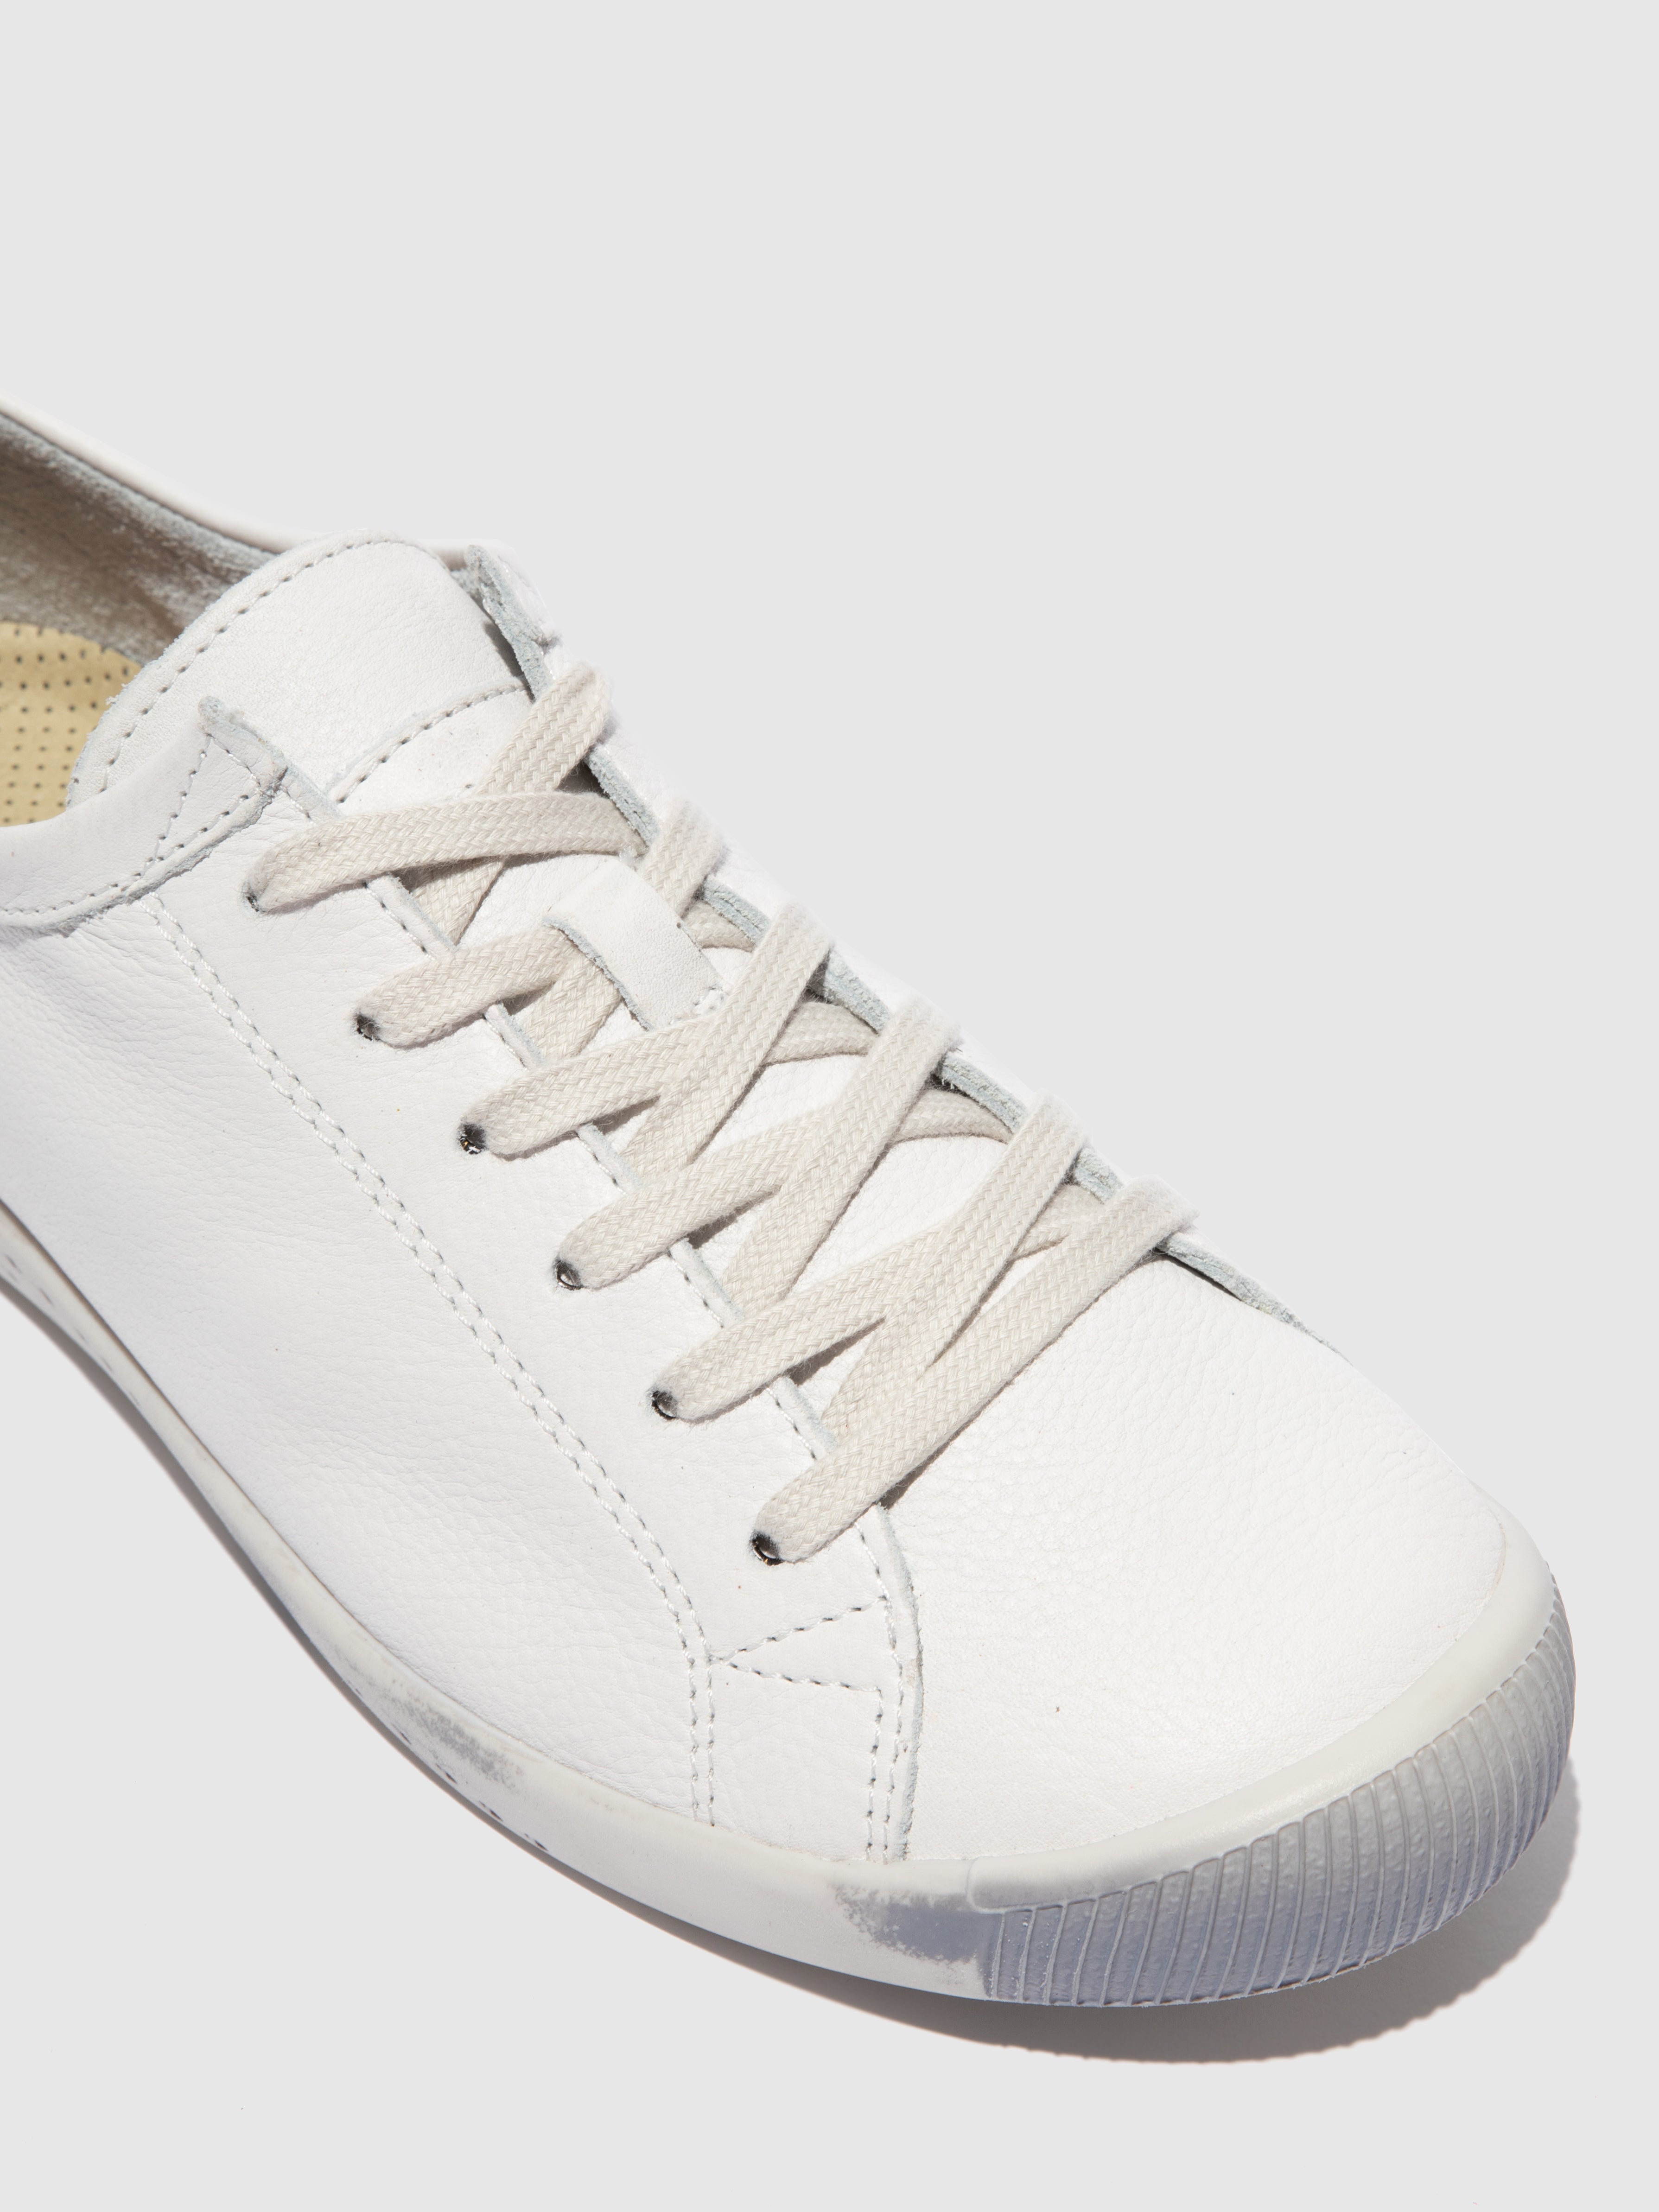 Softinos Isla Ladies White Leather Lace Up Shoes